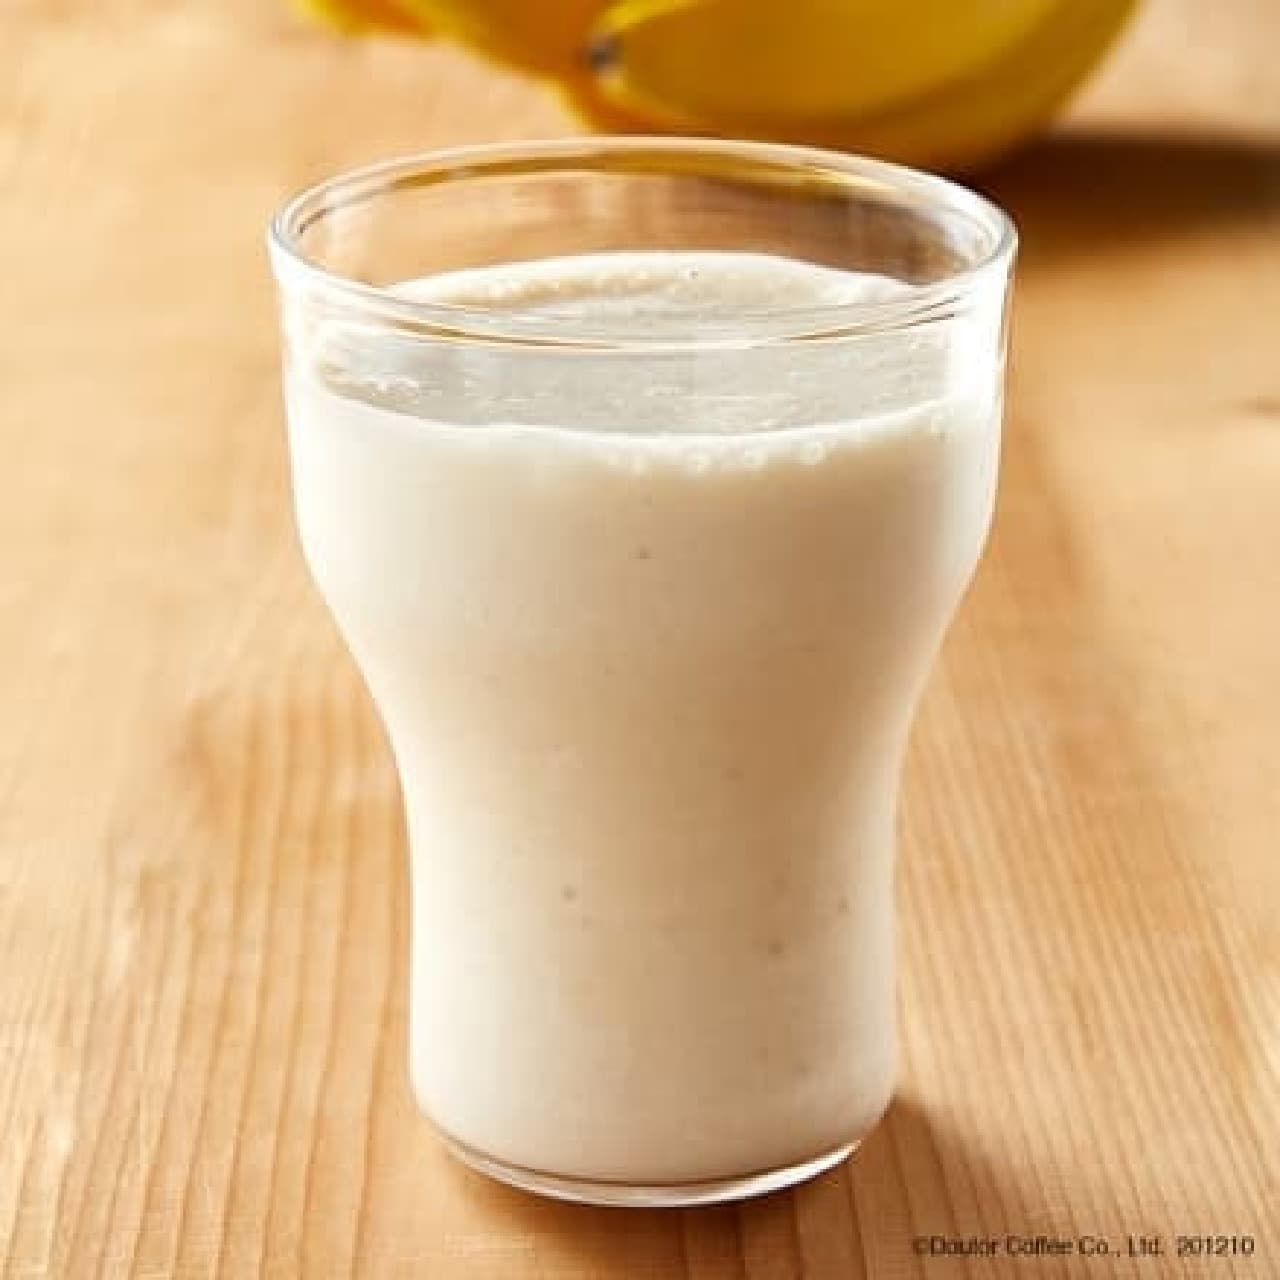 Excelsior Cafe "Protein Smoothie Banana Caramel-Almond Milk Used-"